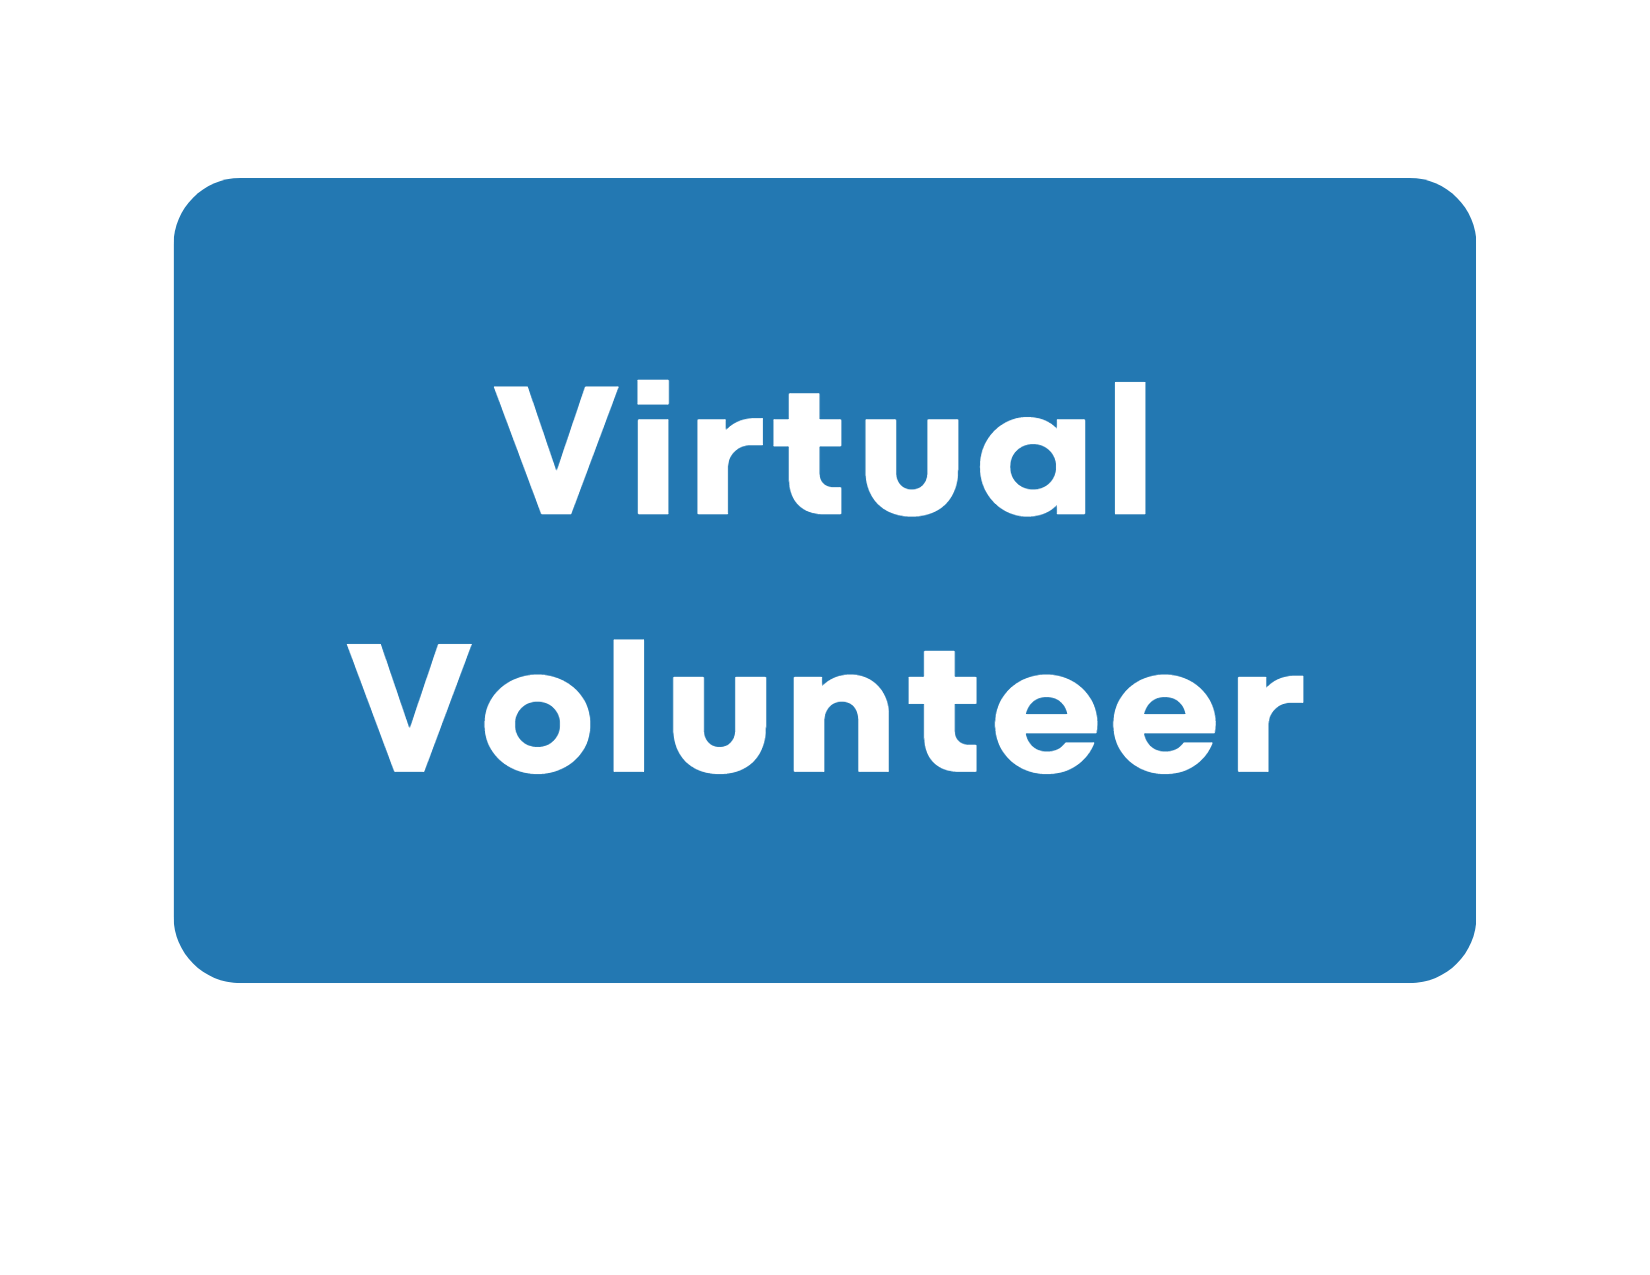 banner with the words "Virtual Volunteer"